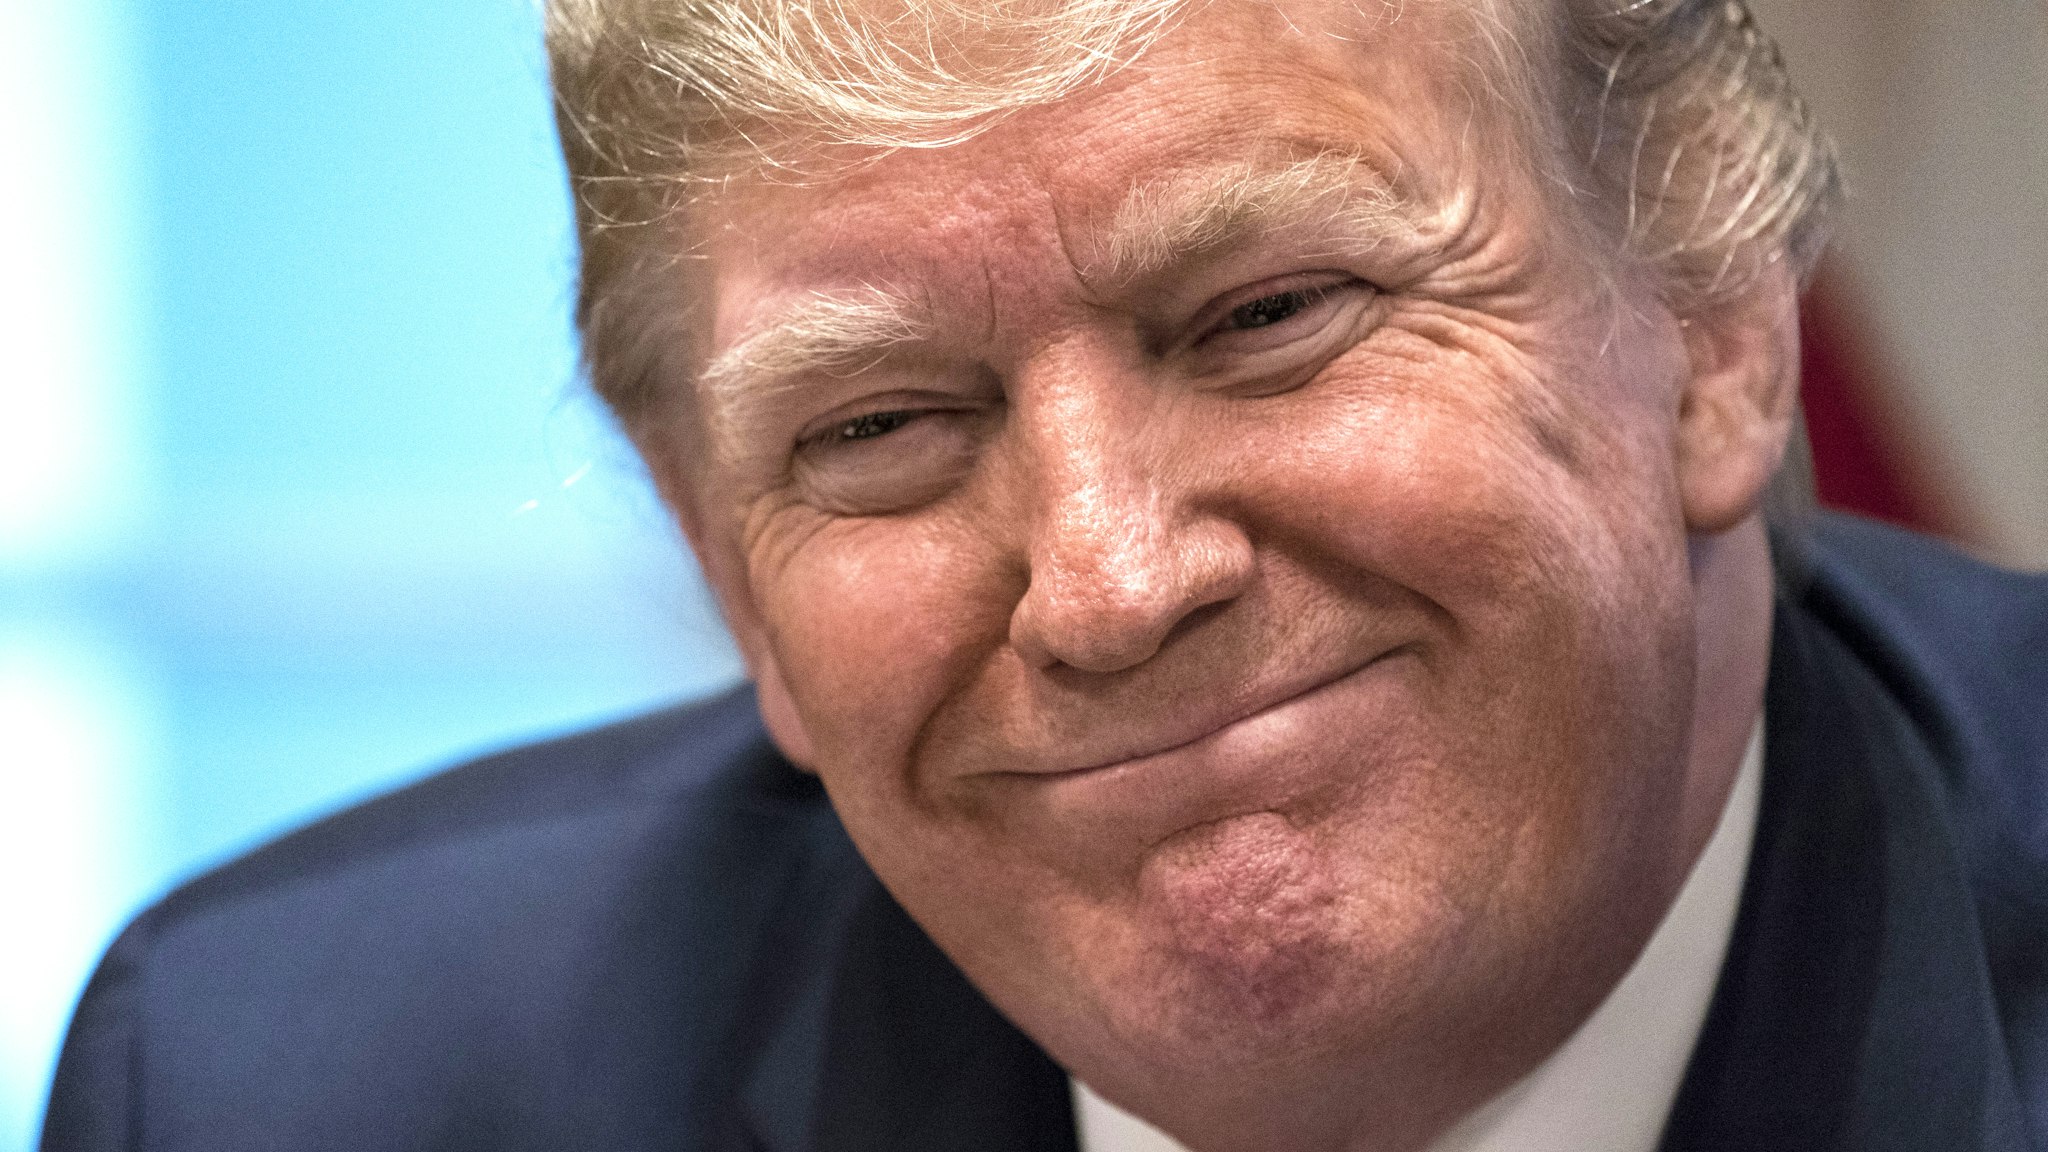 U.S. President Donald Trump smiles during a round table meeting on education in Washington, D.C., U.S., on Monday, Dec. 9, 2019. The Federal Bureau of Investigation acted properly when it began a broad investigation into whether then-candidate Trump or people around him conspired with Russia to interfere in the 2016 election, according to the Justice Department's inspector general.